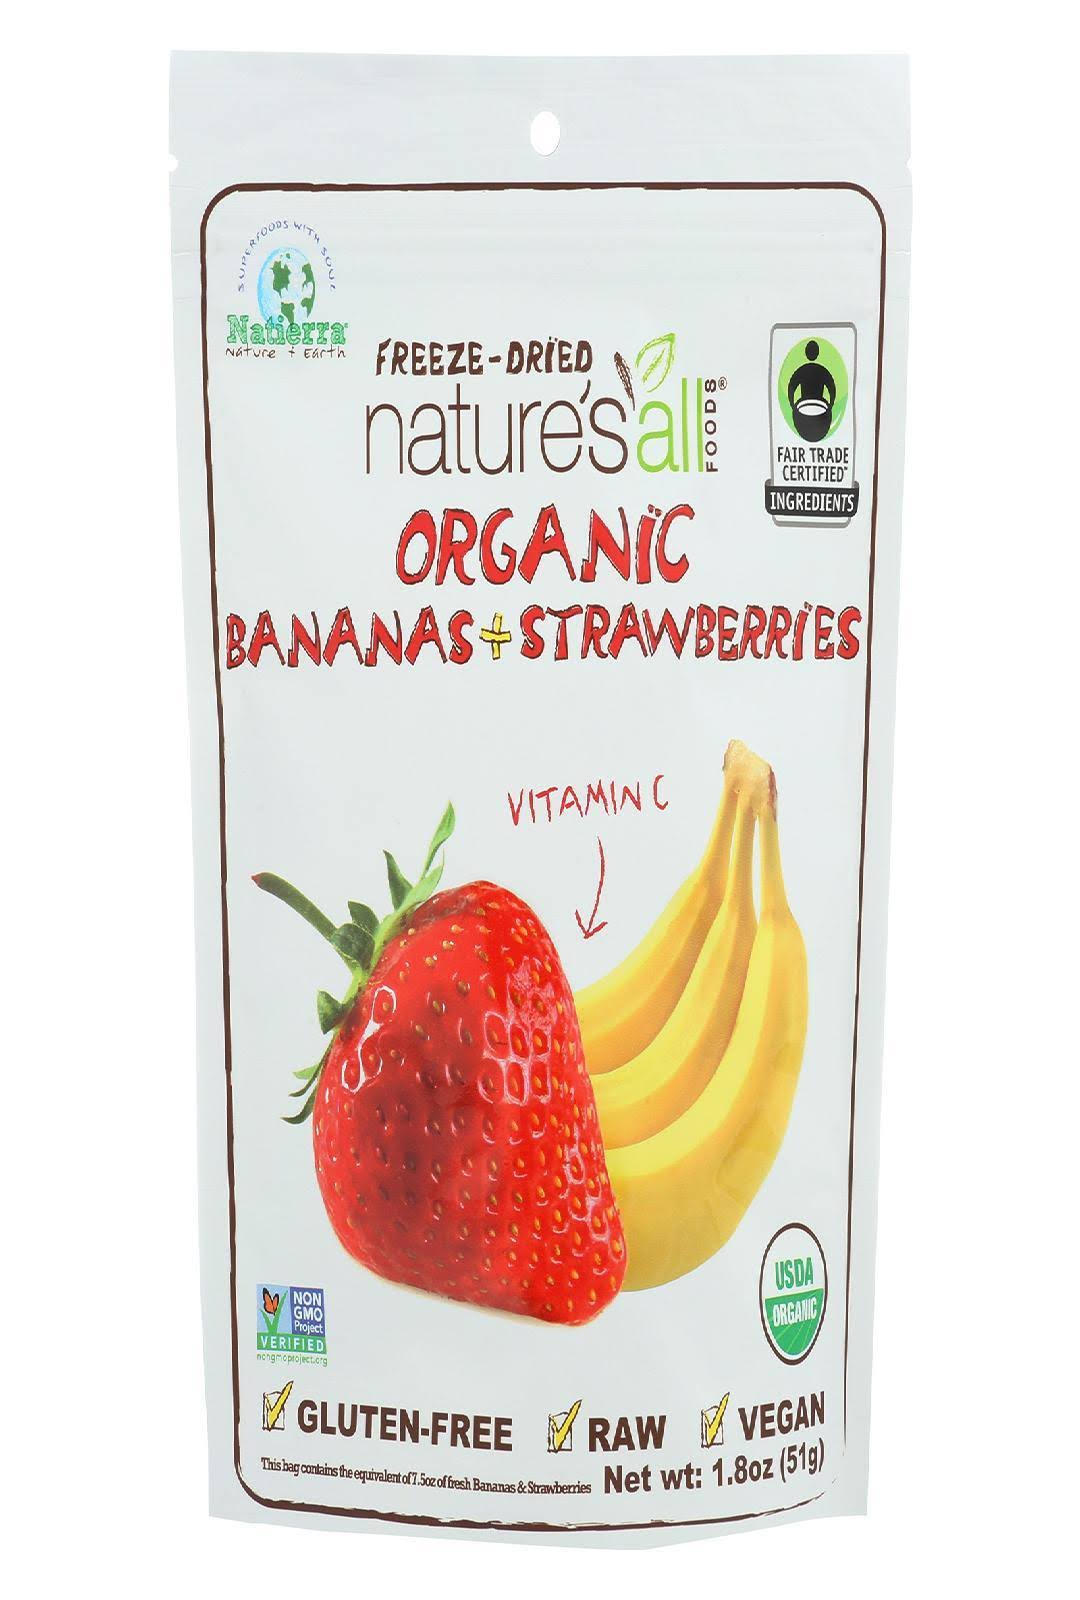 Nature's All Foods Organic Freeze Dried Bananas & Strawberries